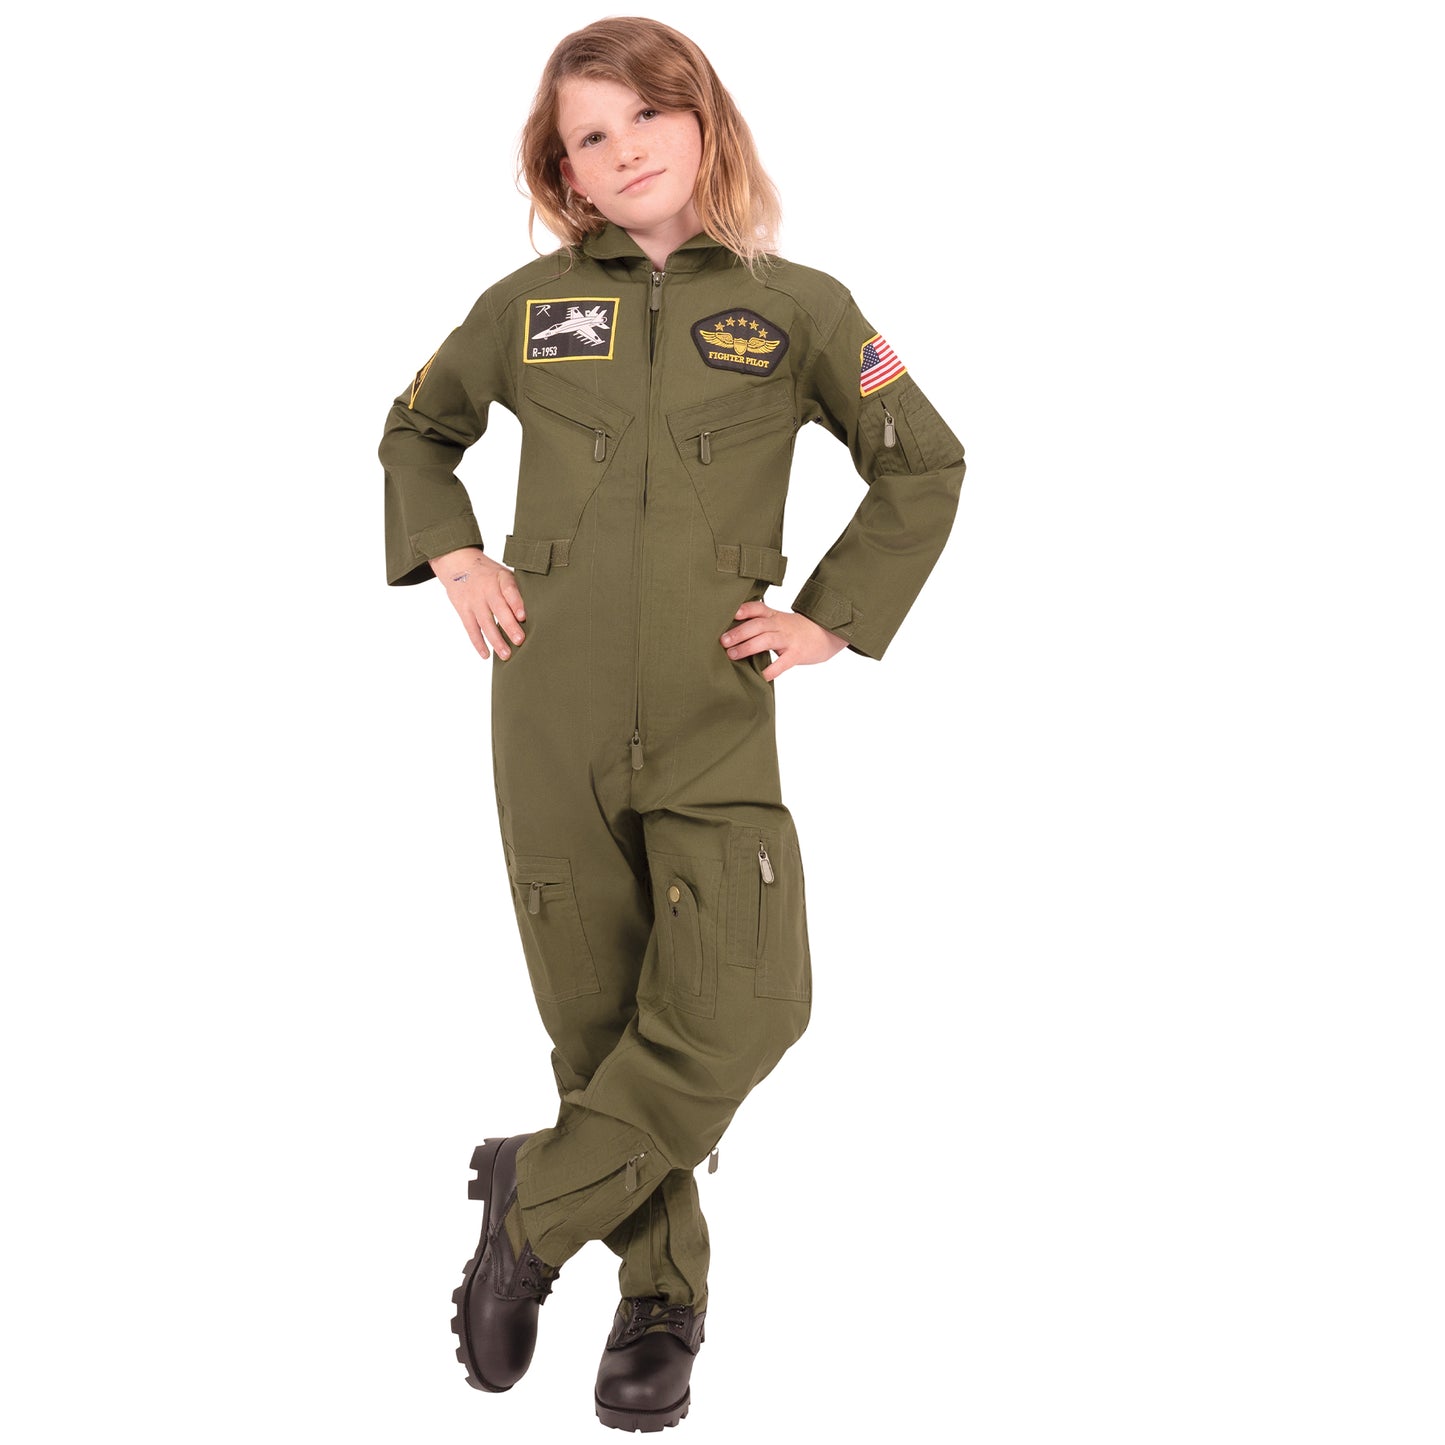 Kid Flight Coverall With Patches - Olive Drab